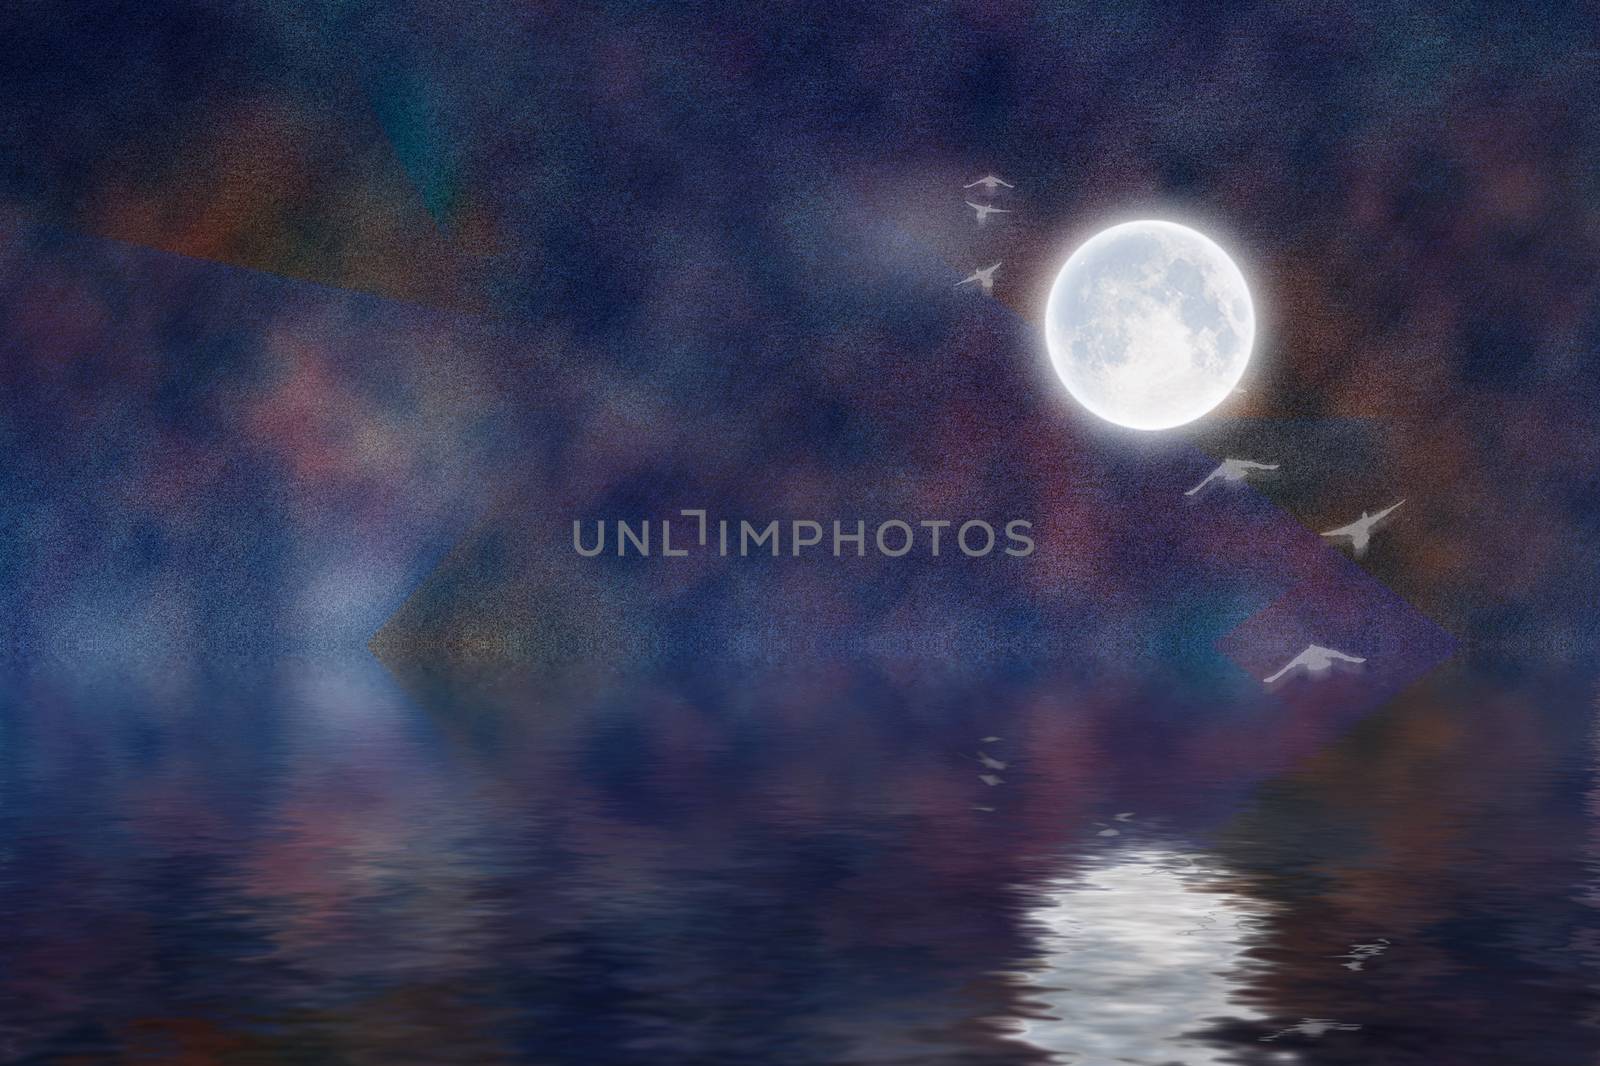 In the moonlight by applesstock